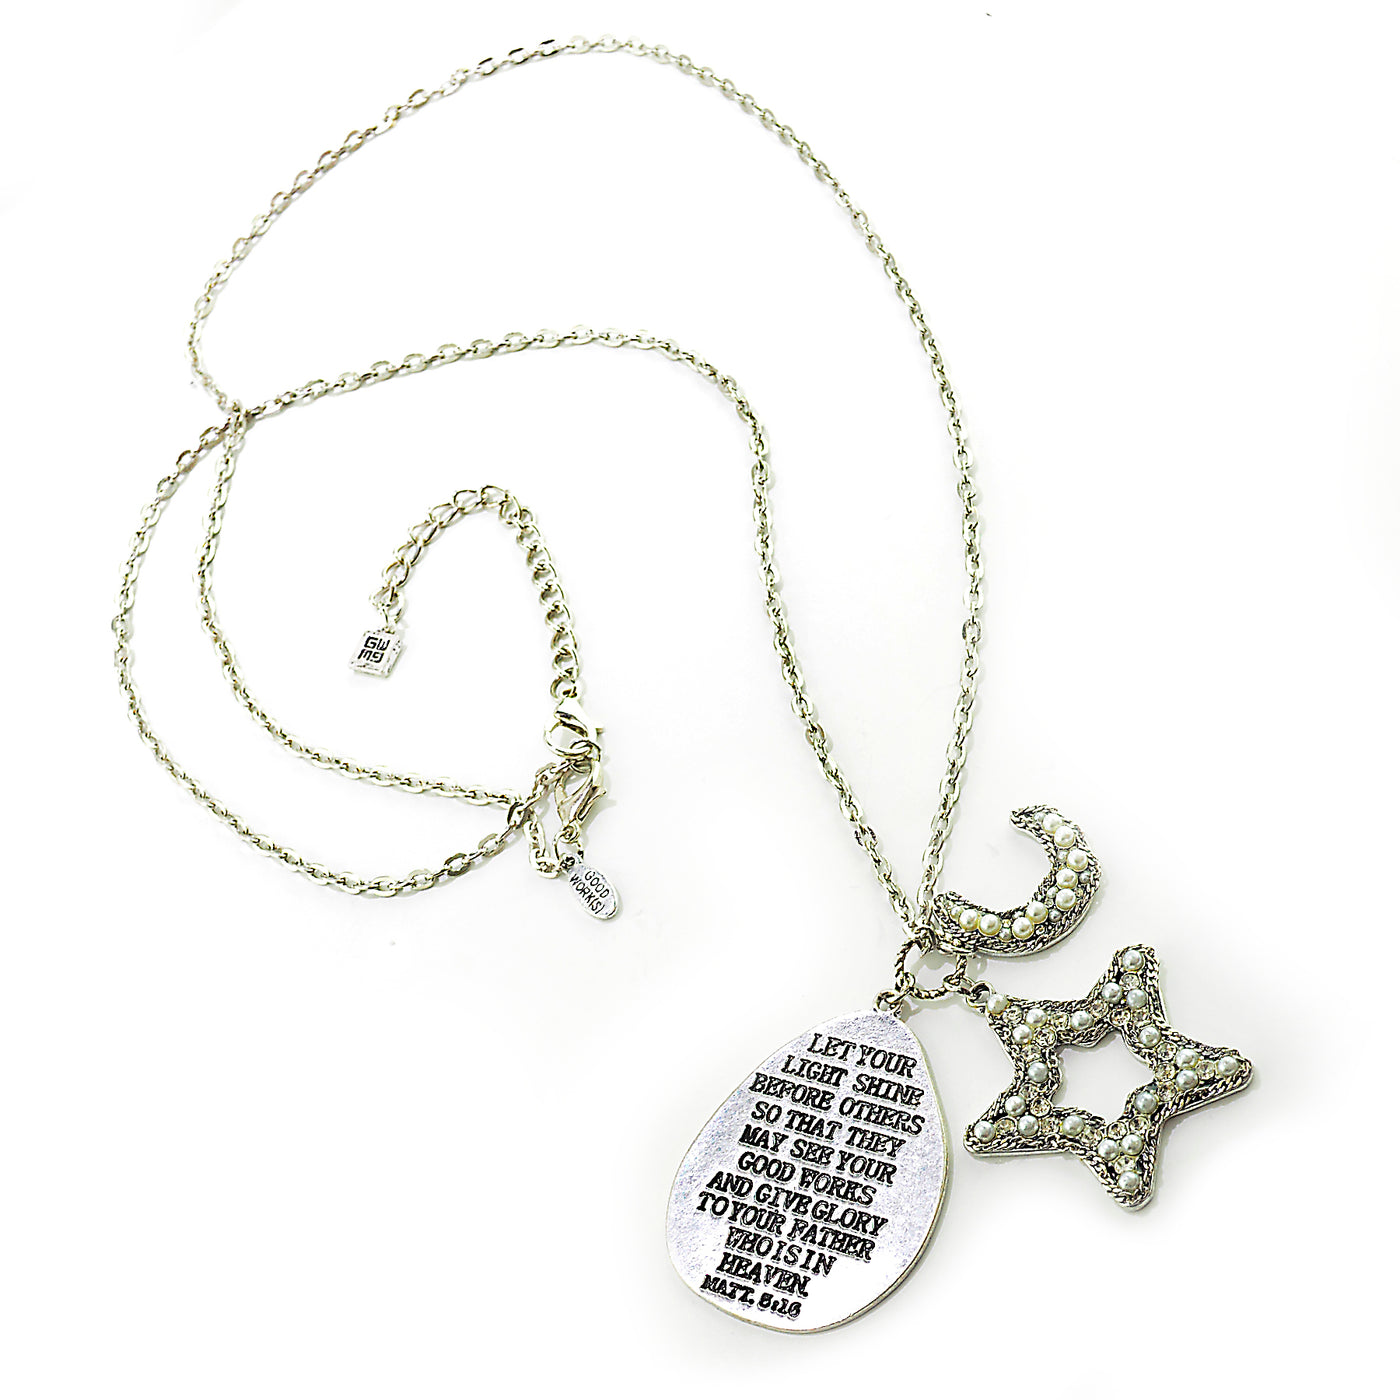 Shine Necklace-Good Work(s) Make A Difference® | Christian and Inspirational Jewelry Company in Vernon, California